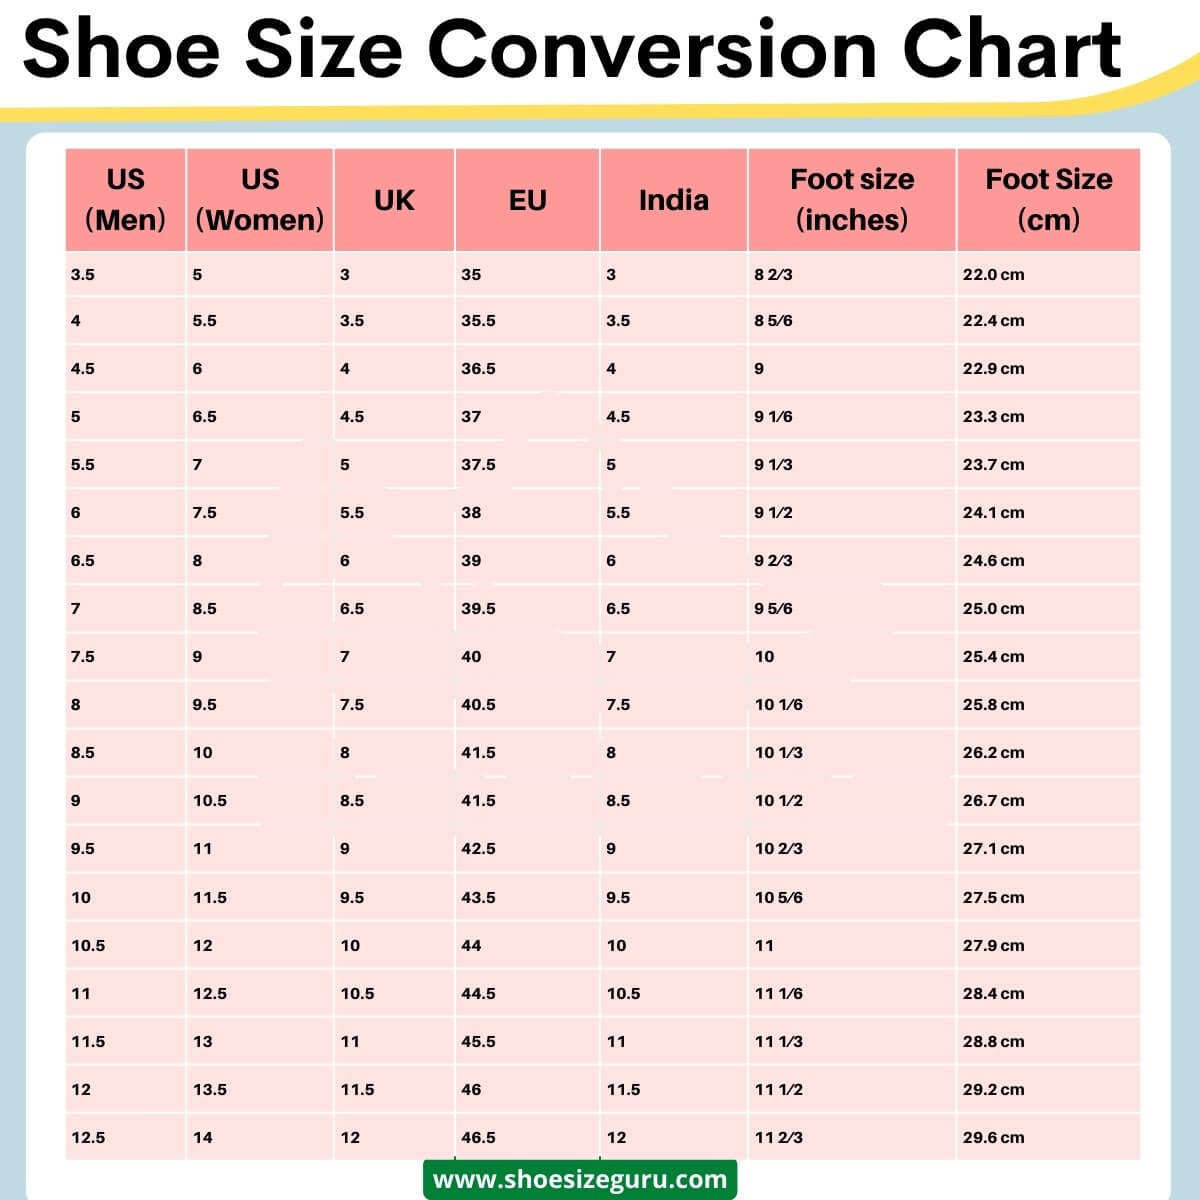 How to Measure Shoe Size with Measuring Tape? | Size Guide